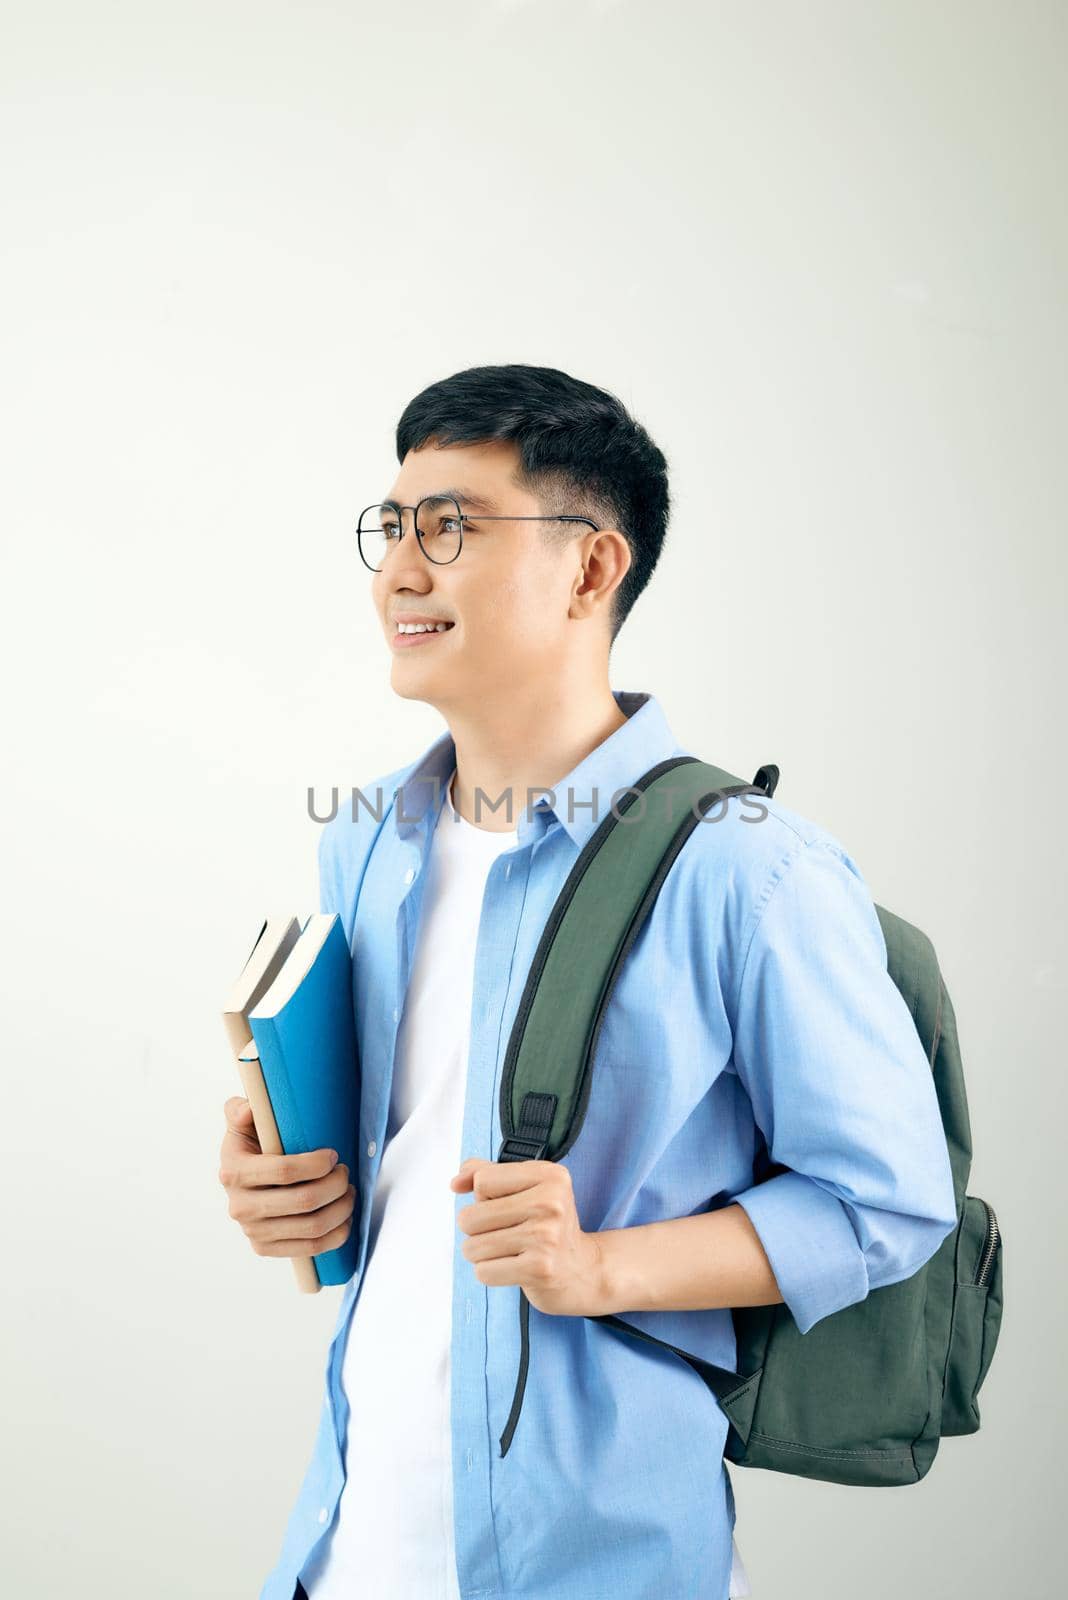 A smiling student carrying his backpack, isolated on a white background